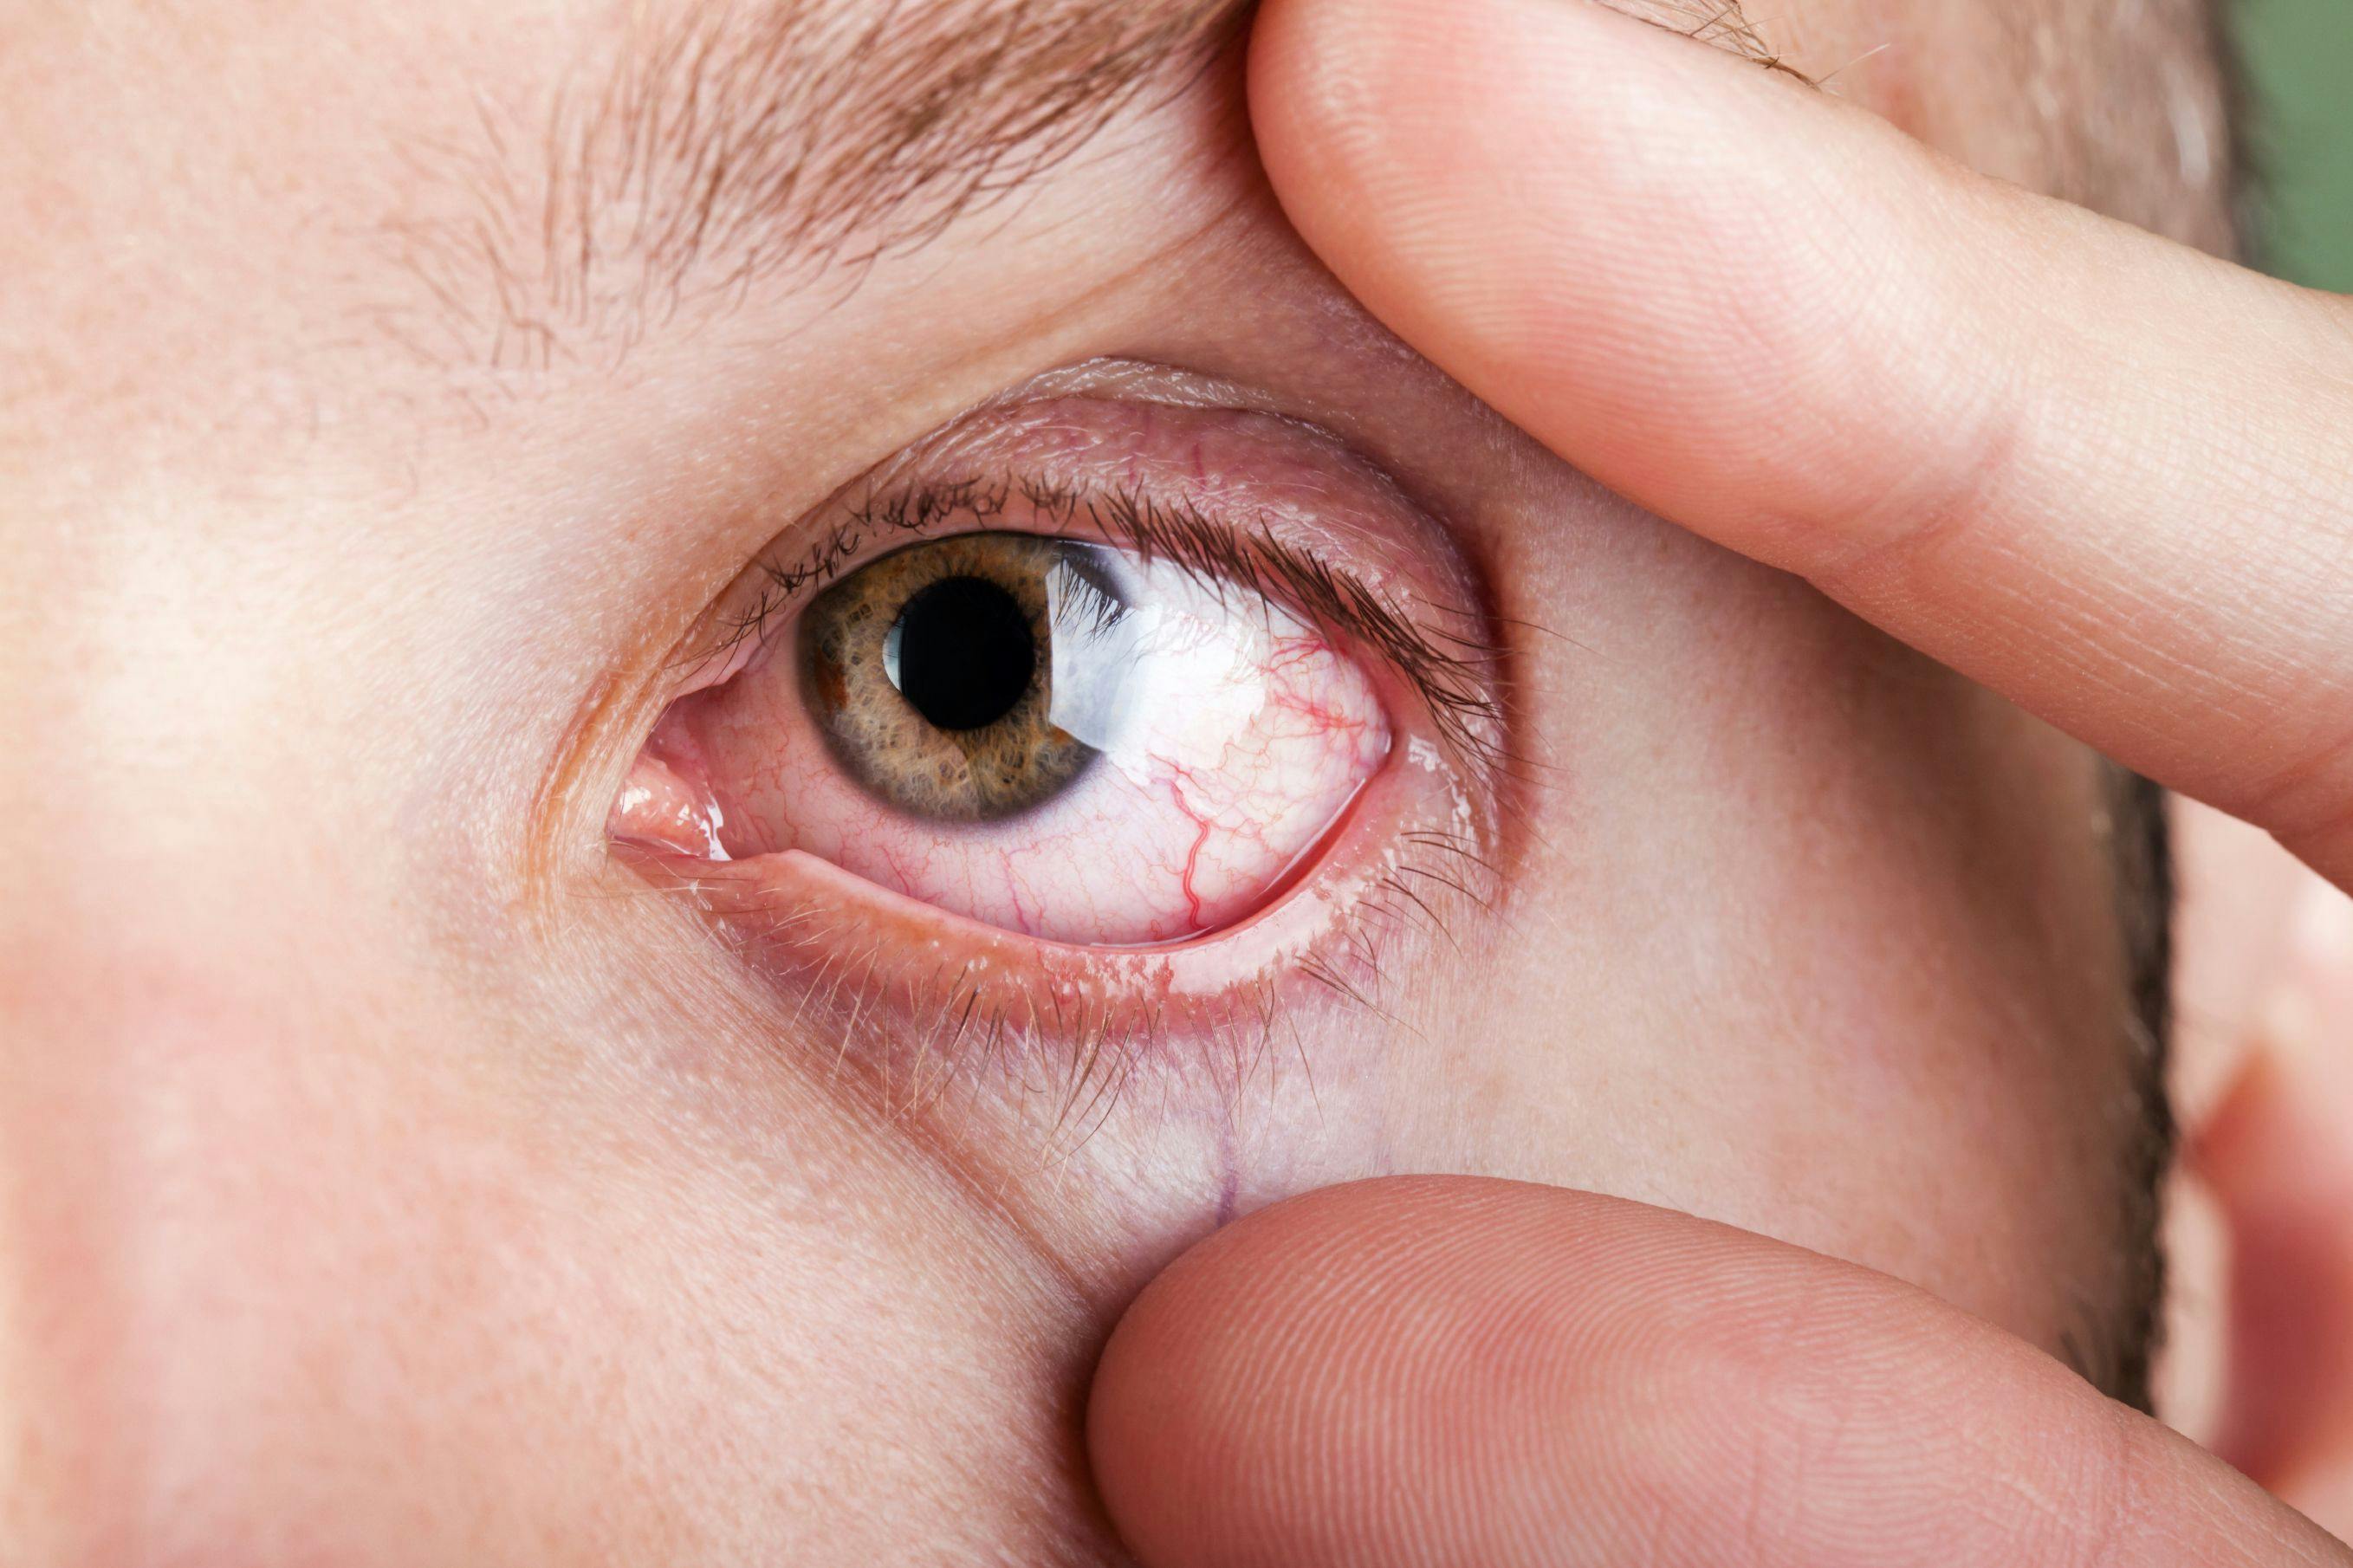 Generic Cyclosporine Ophthalmic Emulsion Approved for Dry Eye